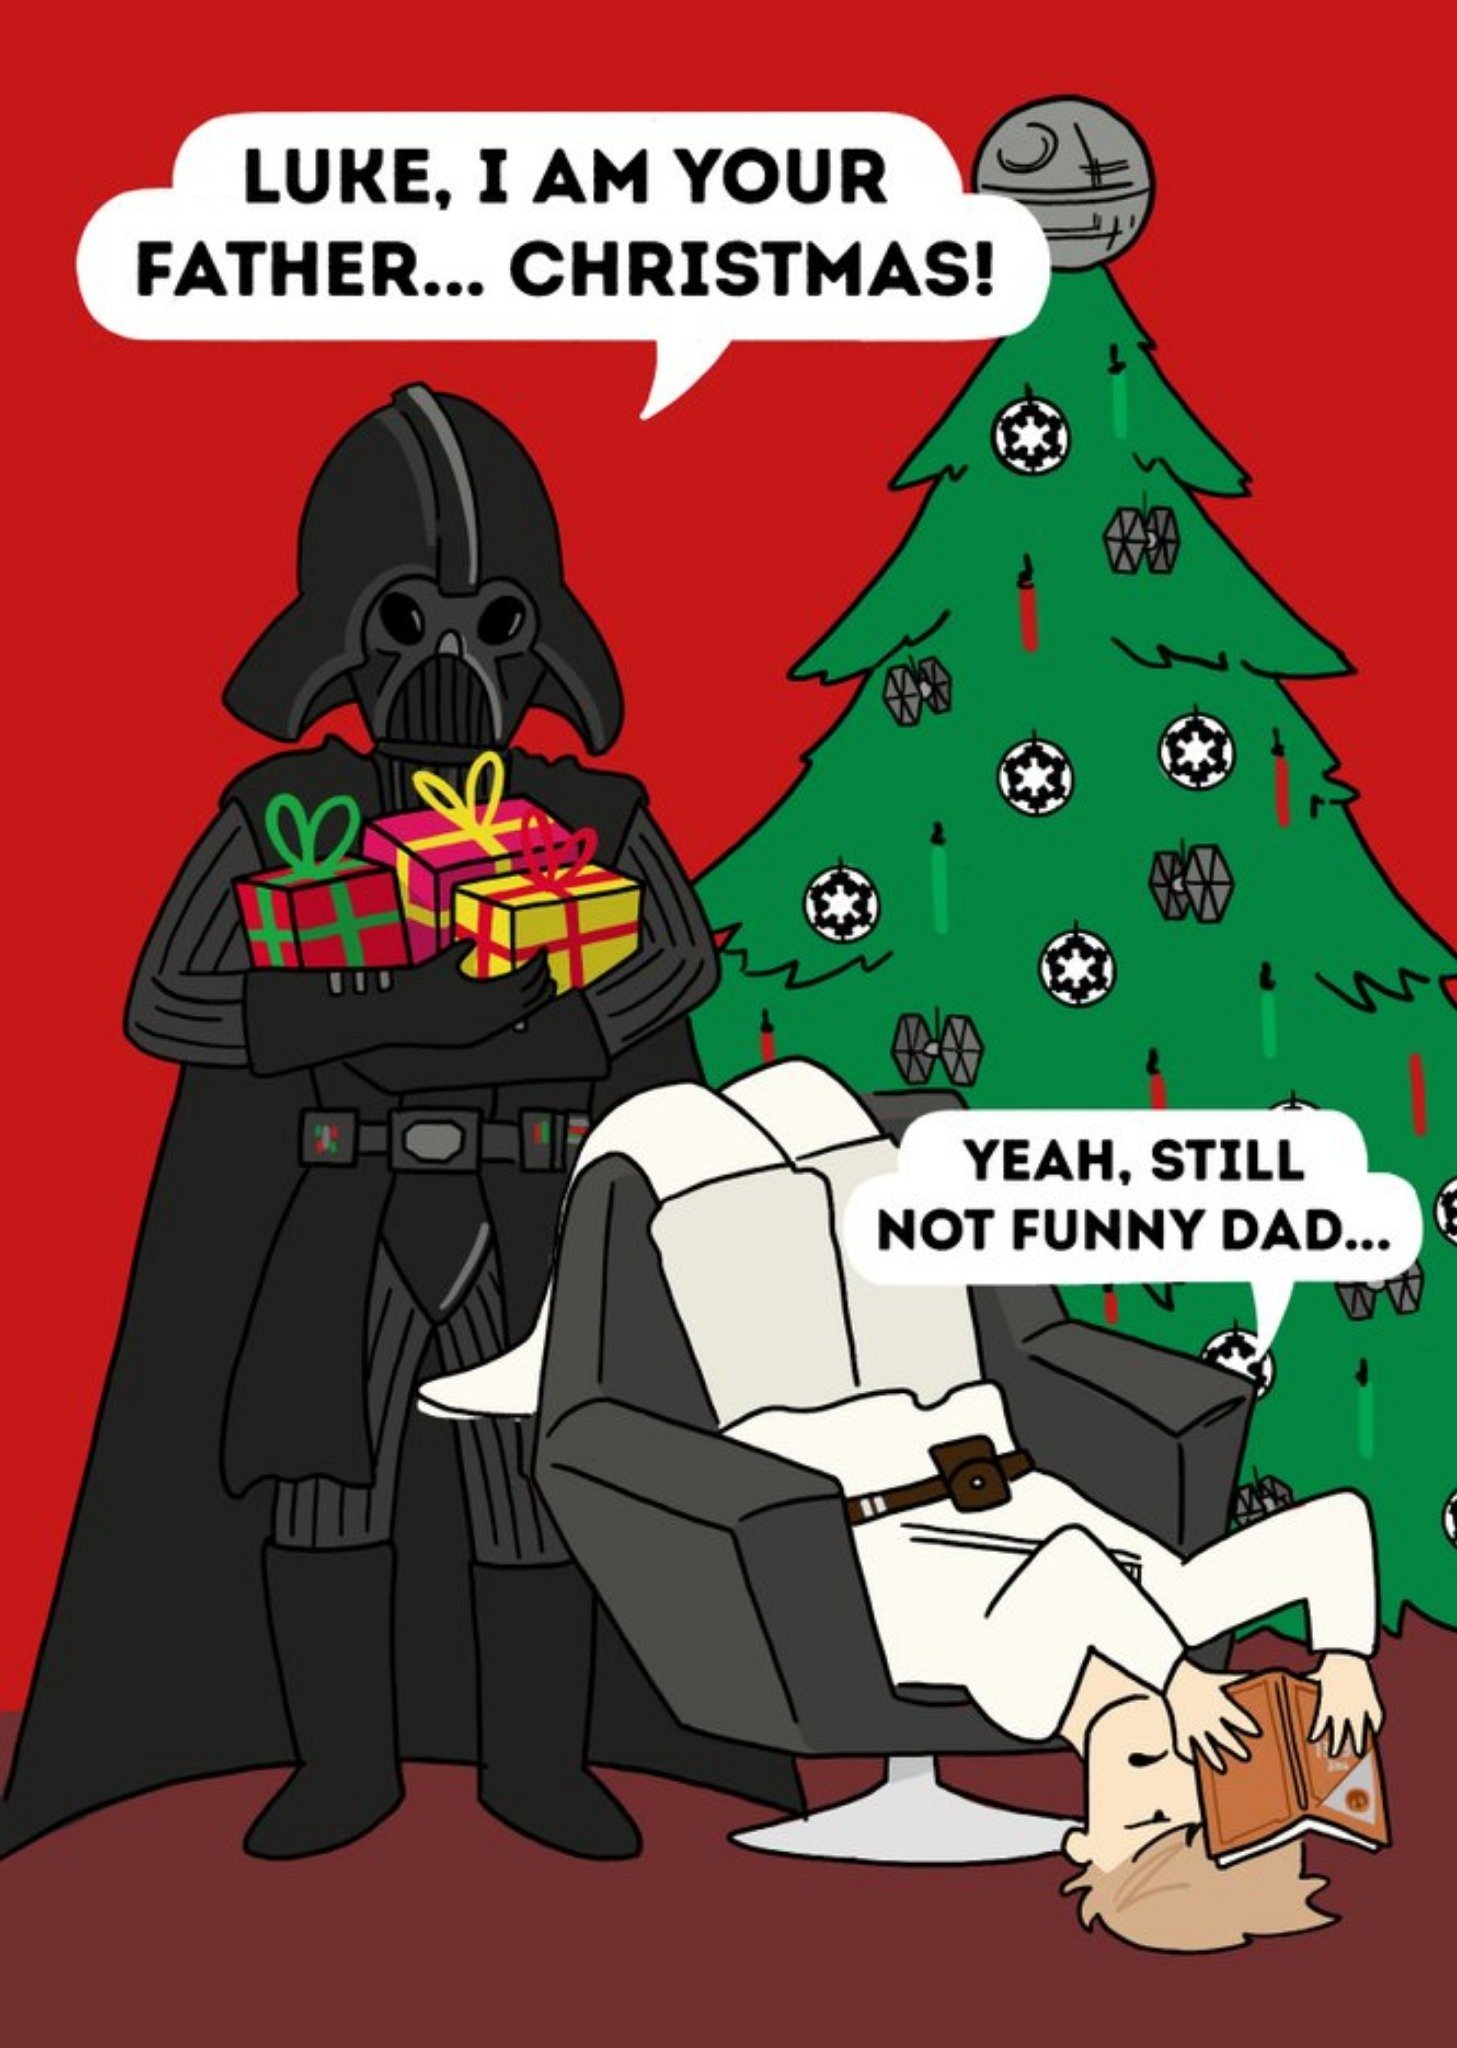 Disney Star Wars I Am Your Father Christmas Funny Darth Vader Card, Large